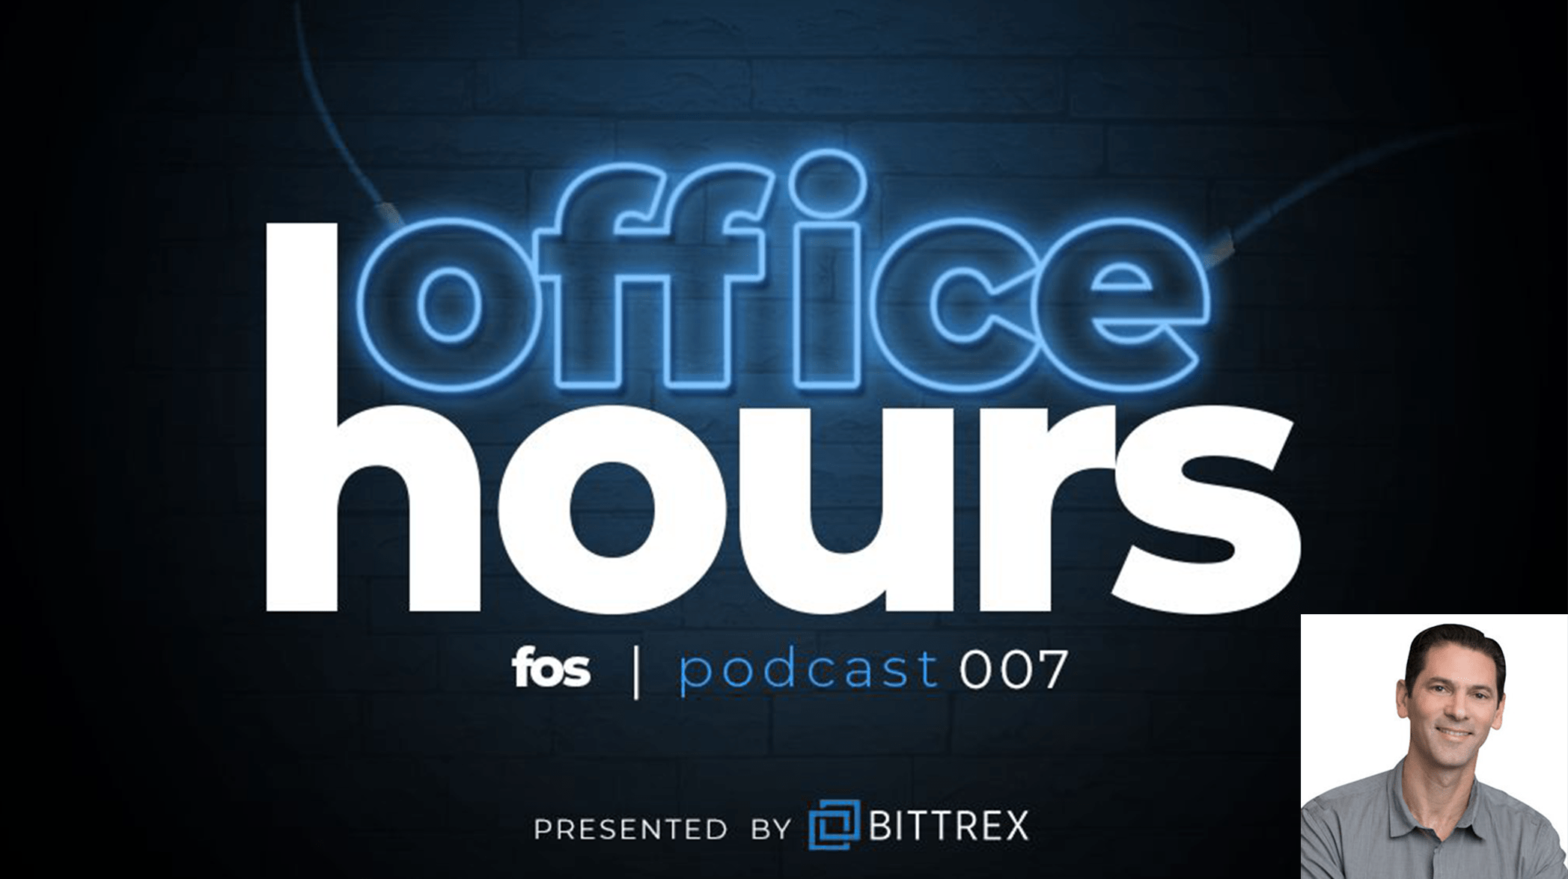 Shawn Green Front Office Sports podcast Office Hours